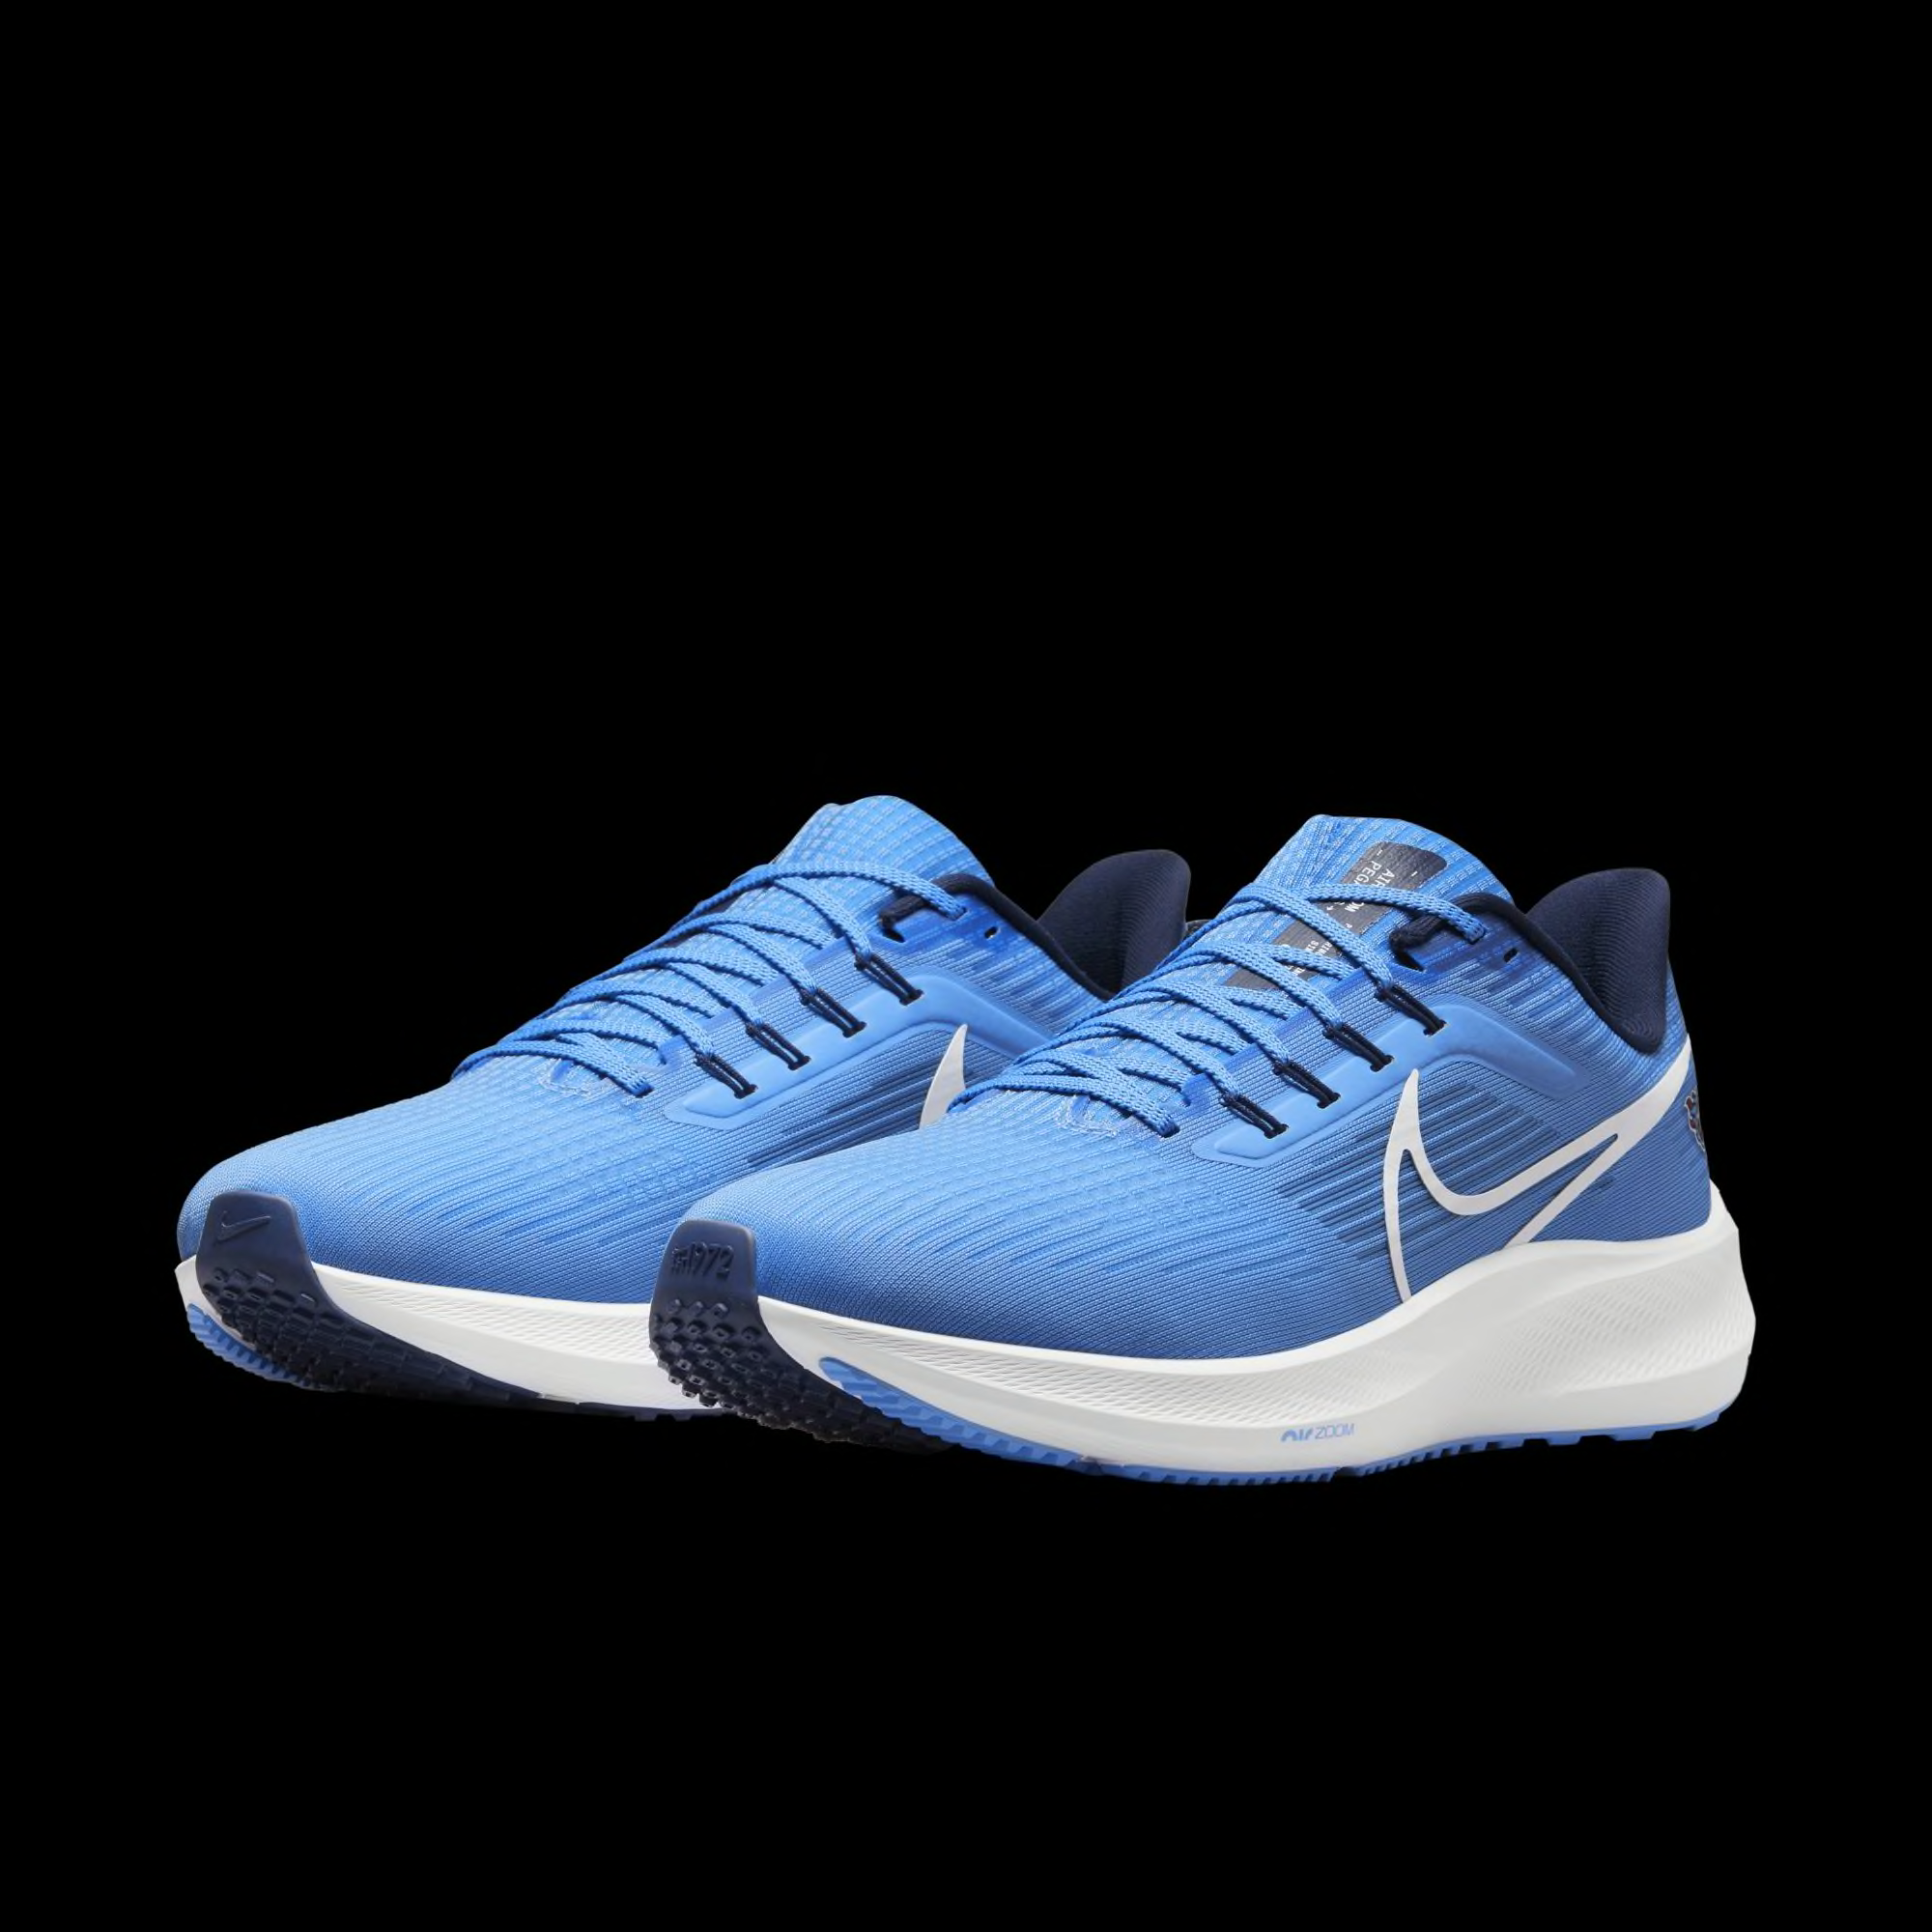 need these Tennessee Titans shoes by